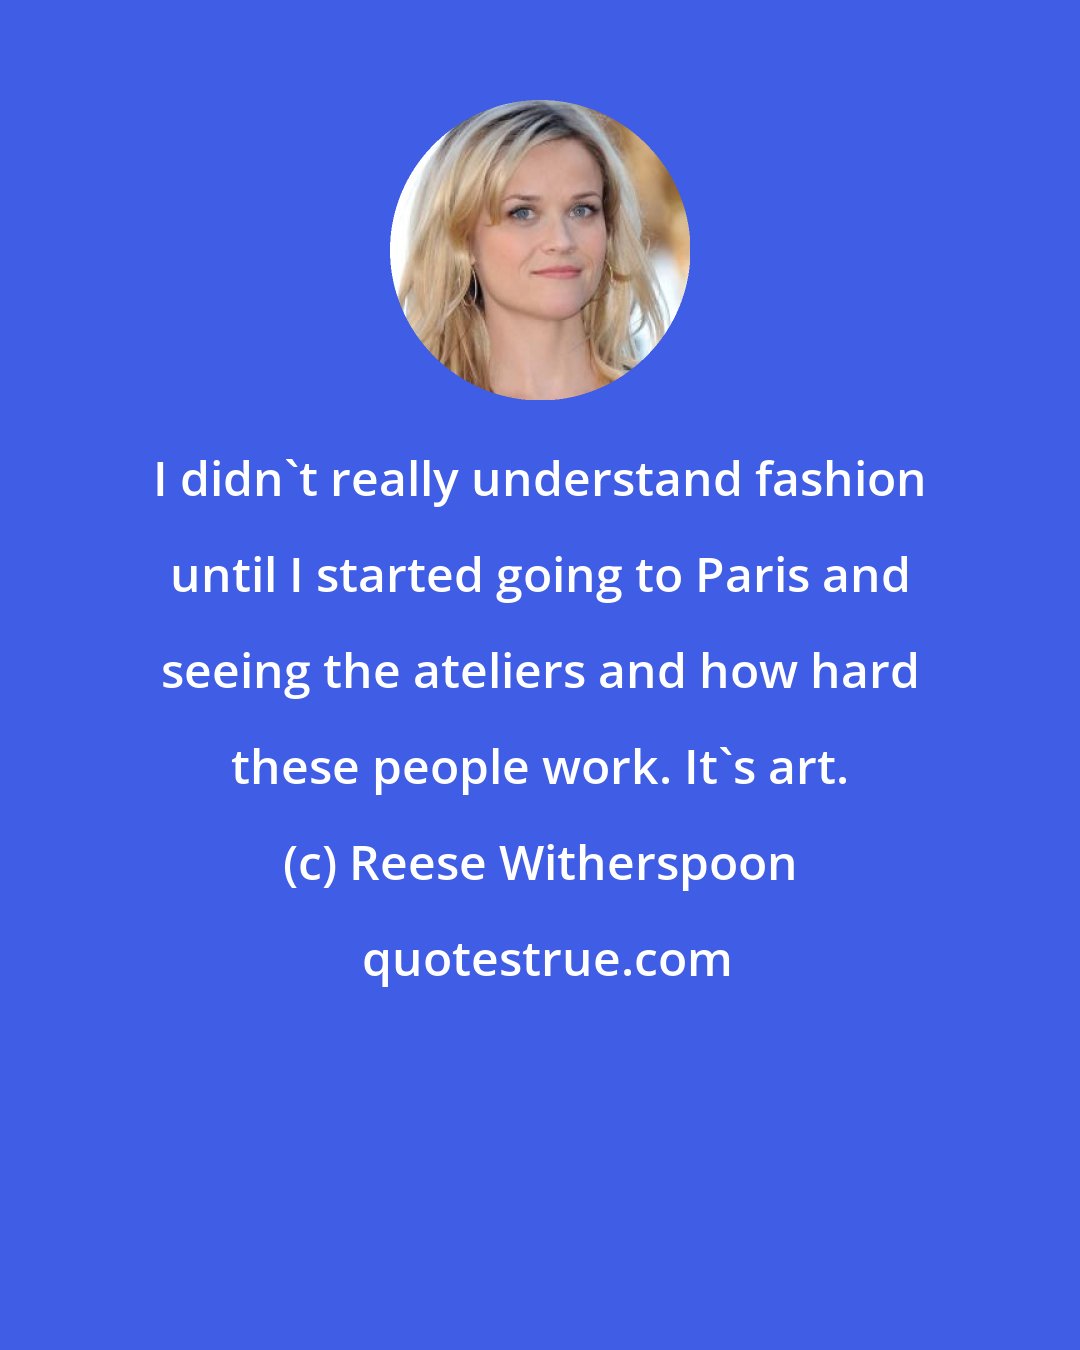 Reese Witherspoon: I didn't really understand fashion until I started going to Paris and seeing the ateliers and how hard these people work. It's art.